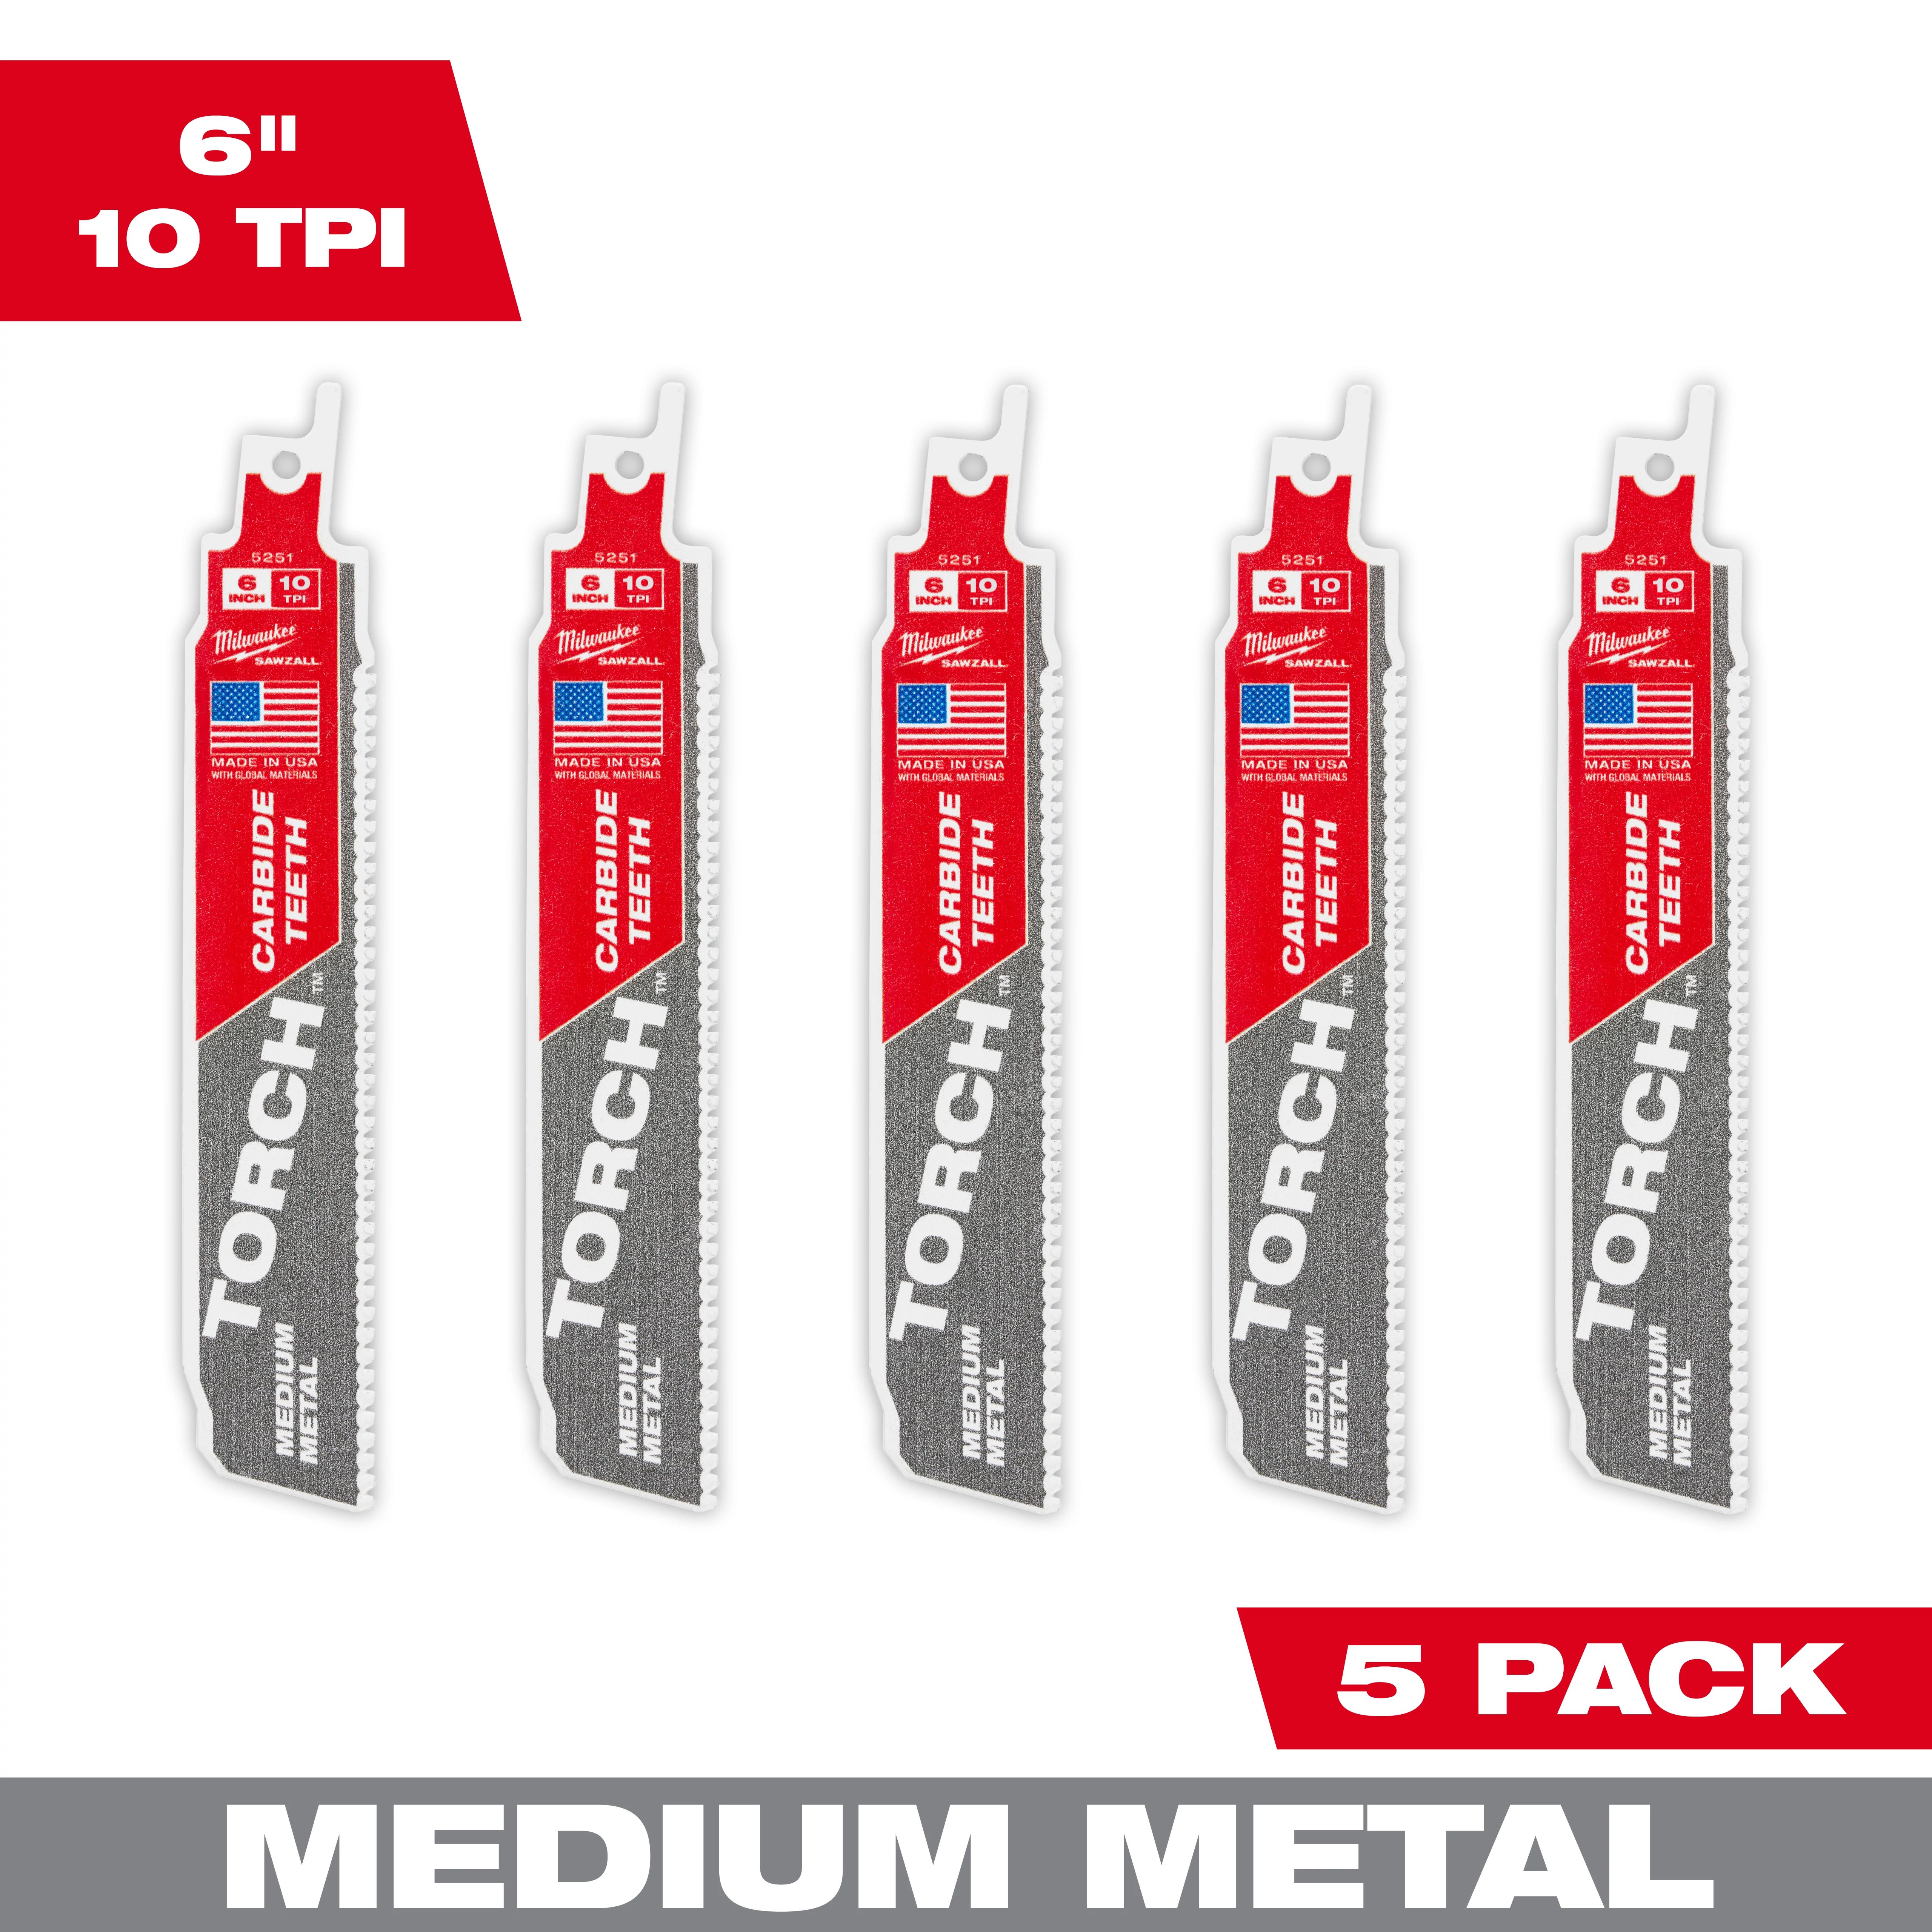 6" 10TPI The TORCH™ with Carbide Teeth for Medium Metal 5PK